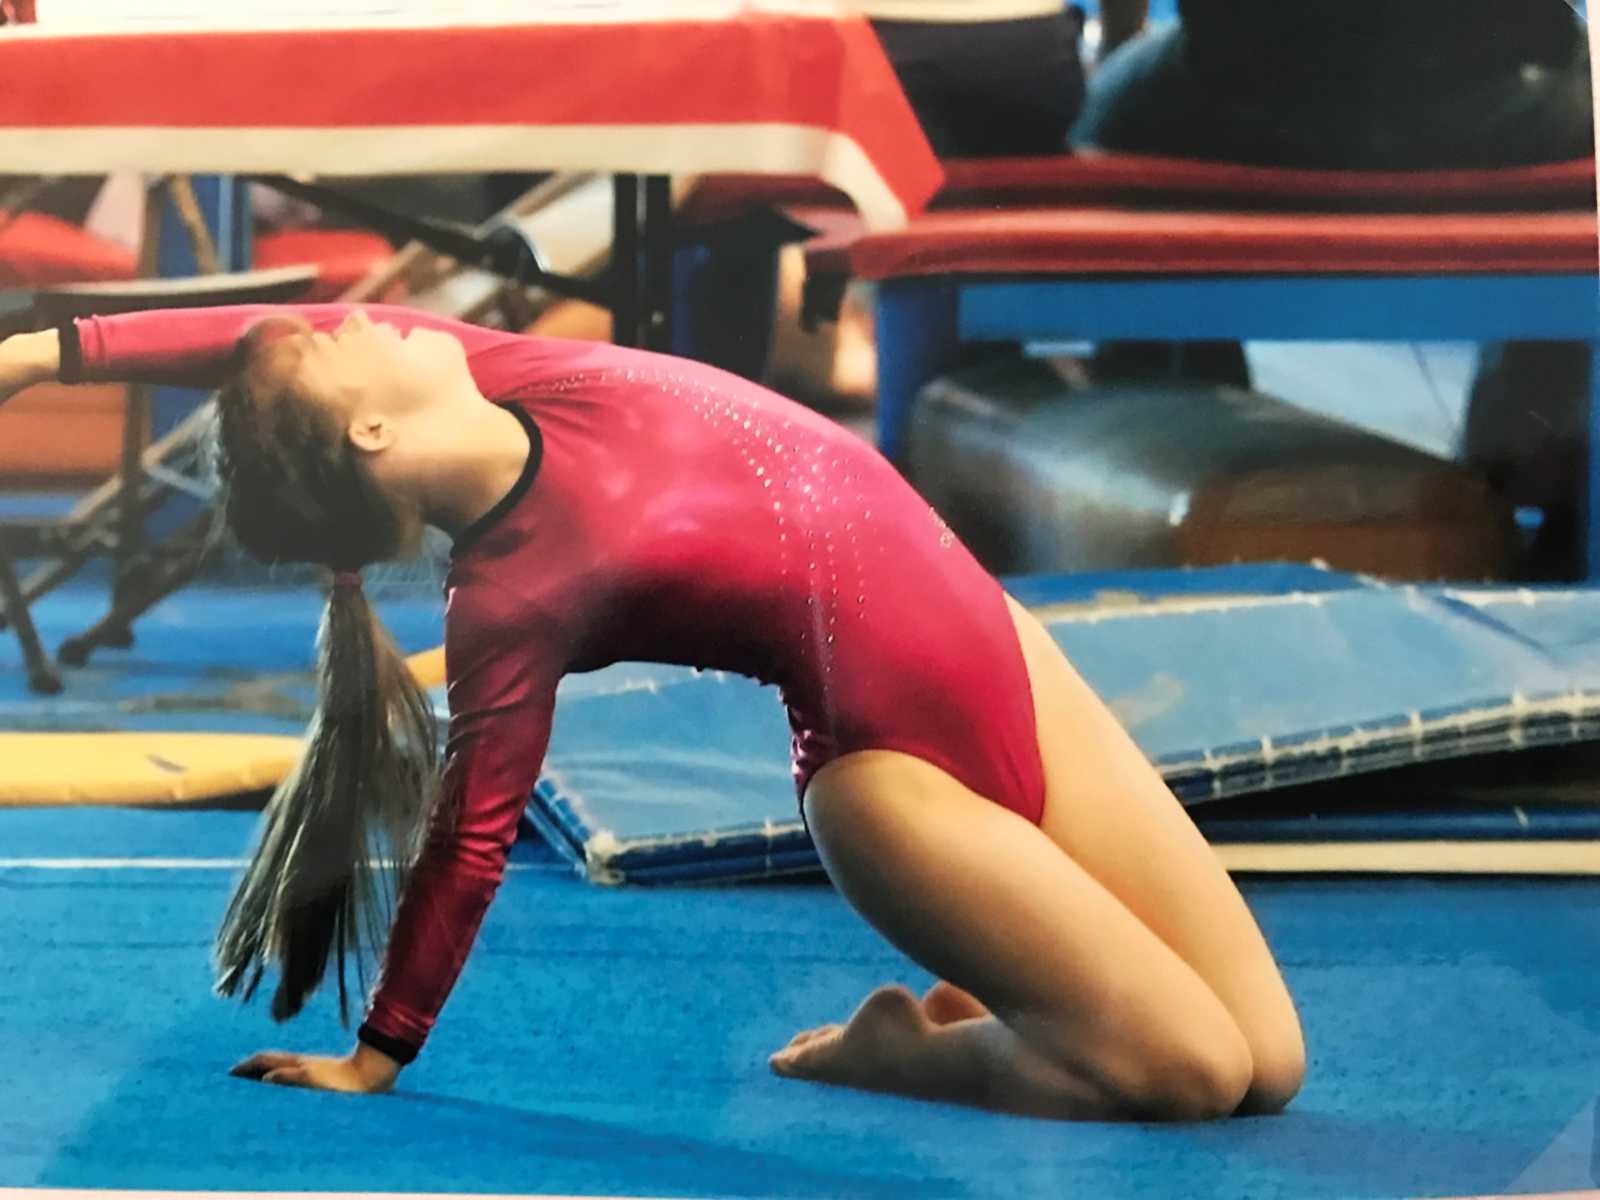 down syndrome girl in pink sparkly leotard poses on the floor doing gymnastics